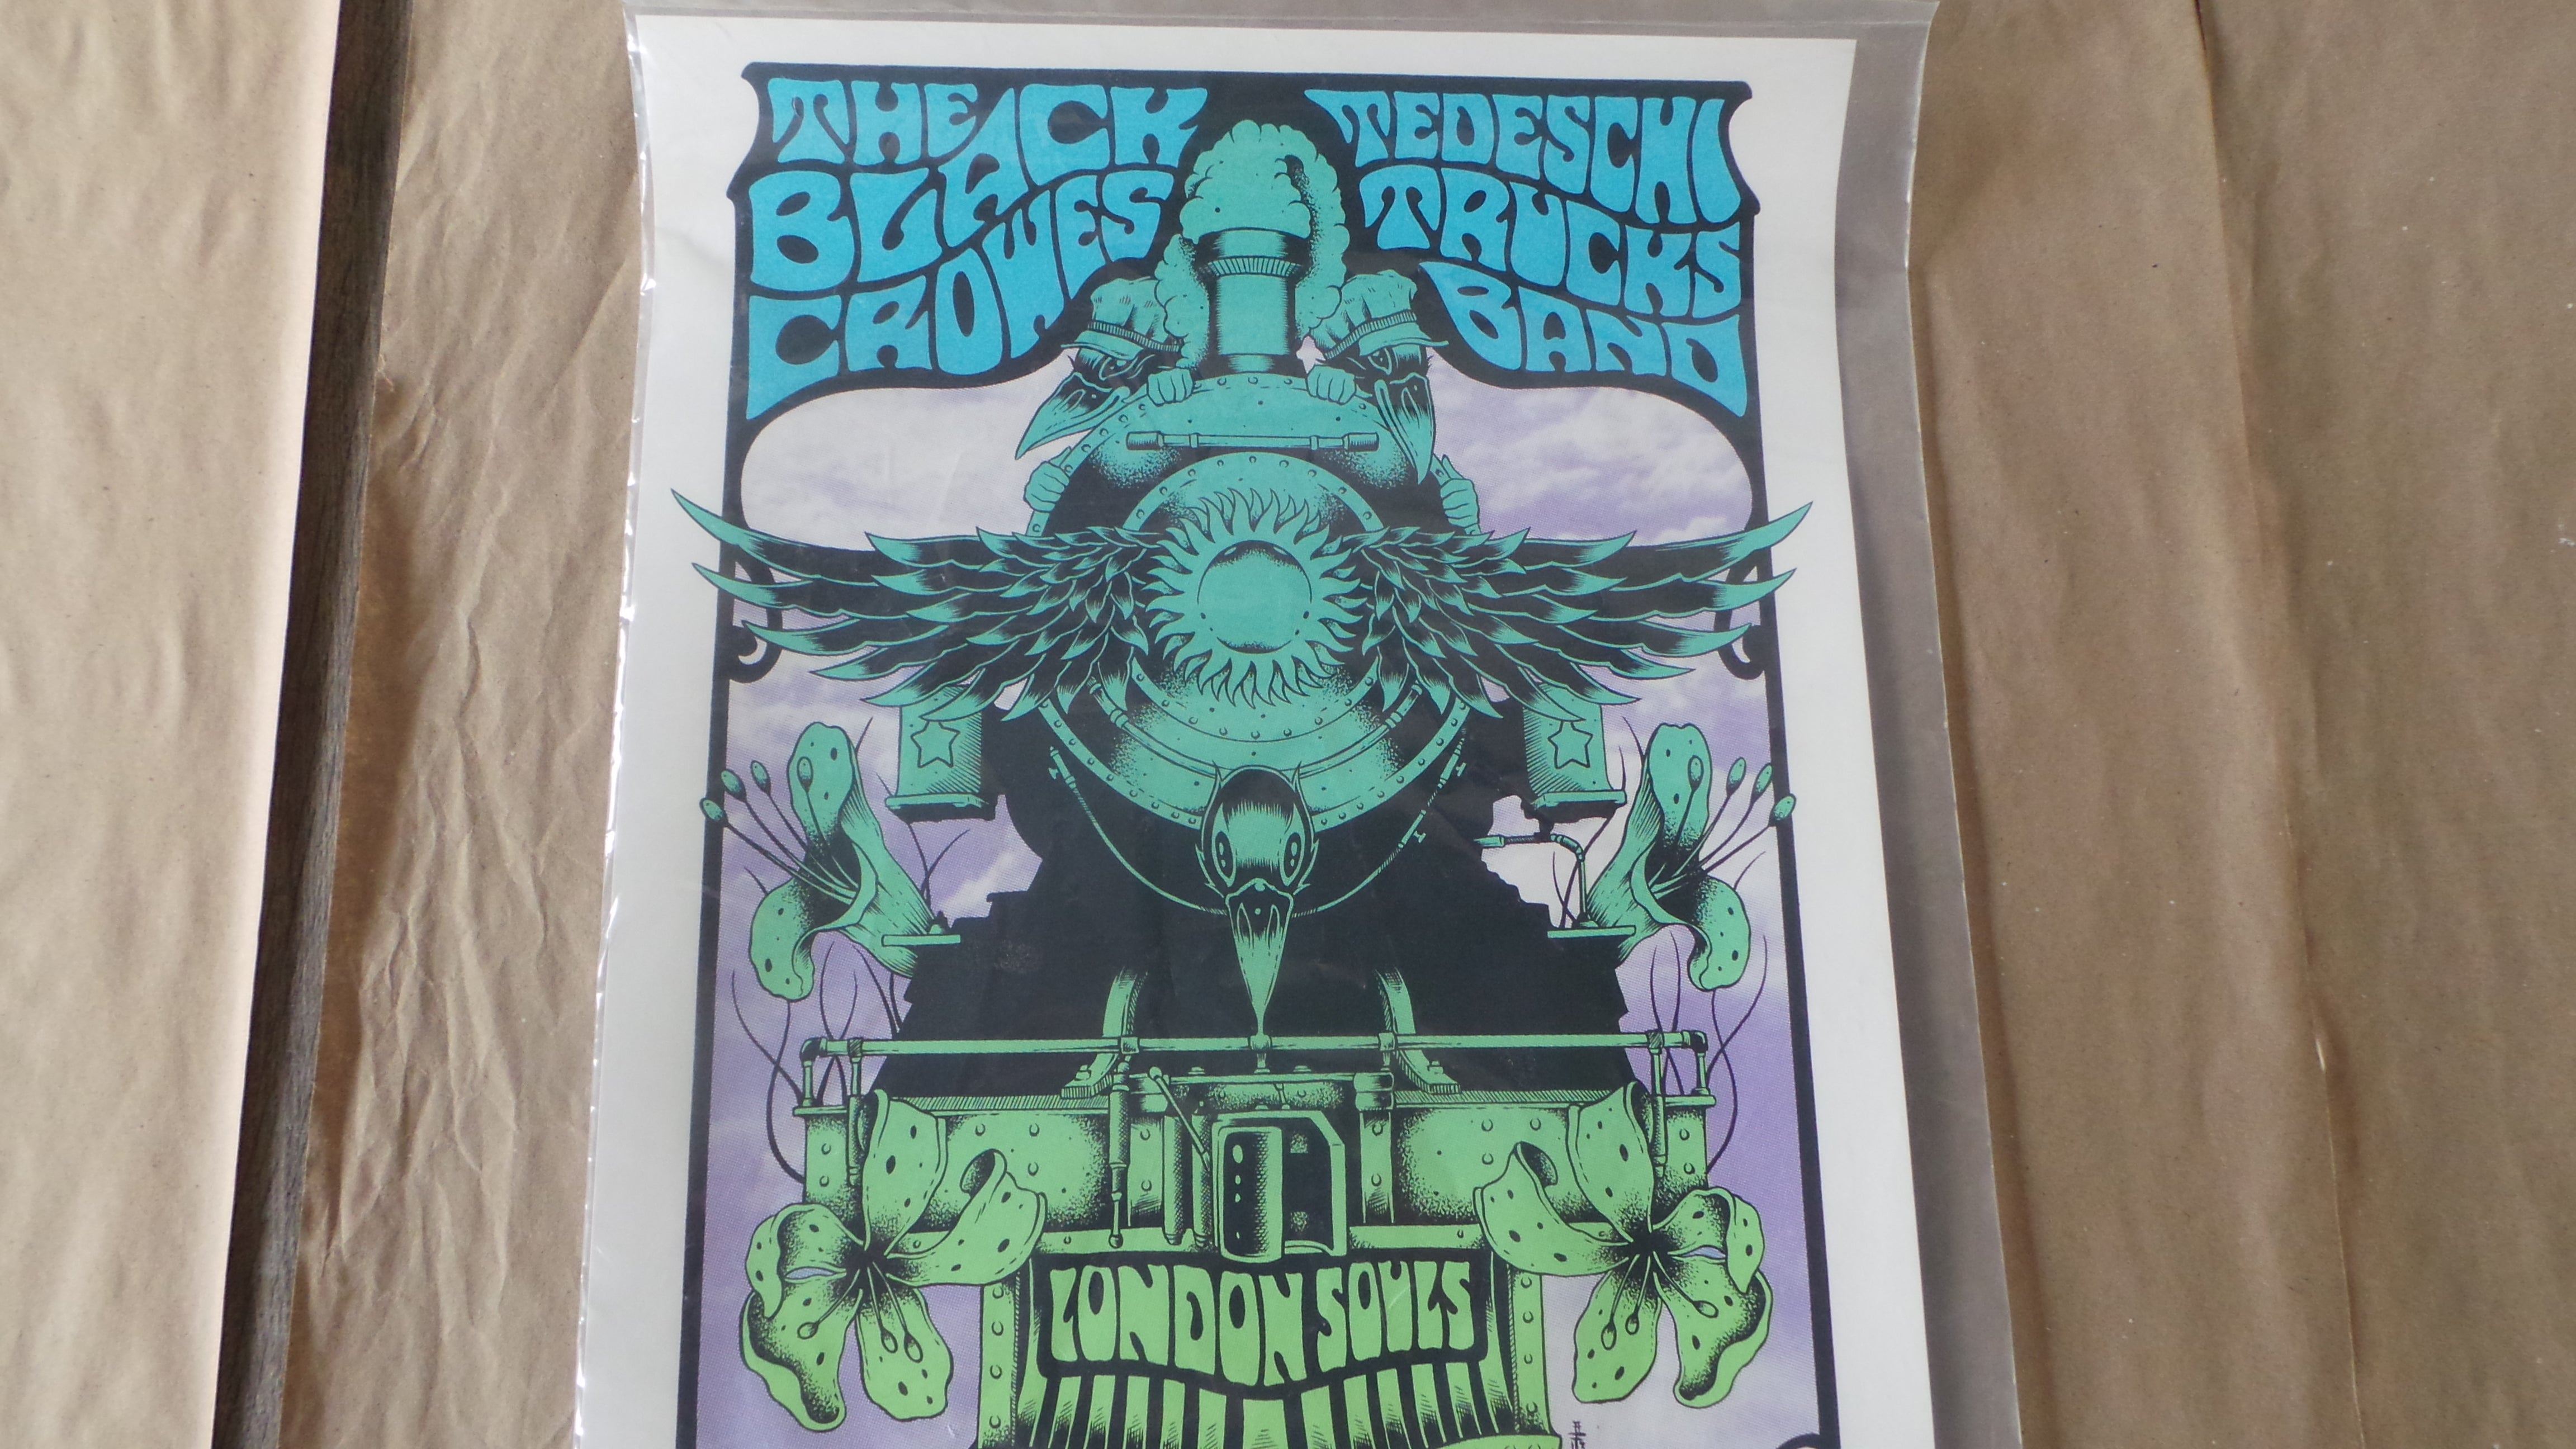 Alan Forbes - Black Crowes with Tedeschi Trucks Band - 2013 Tour Poster